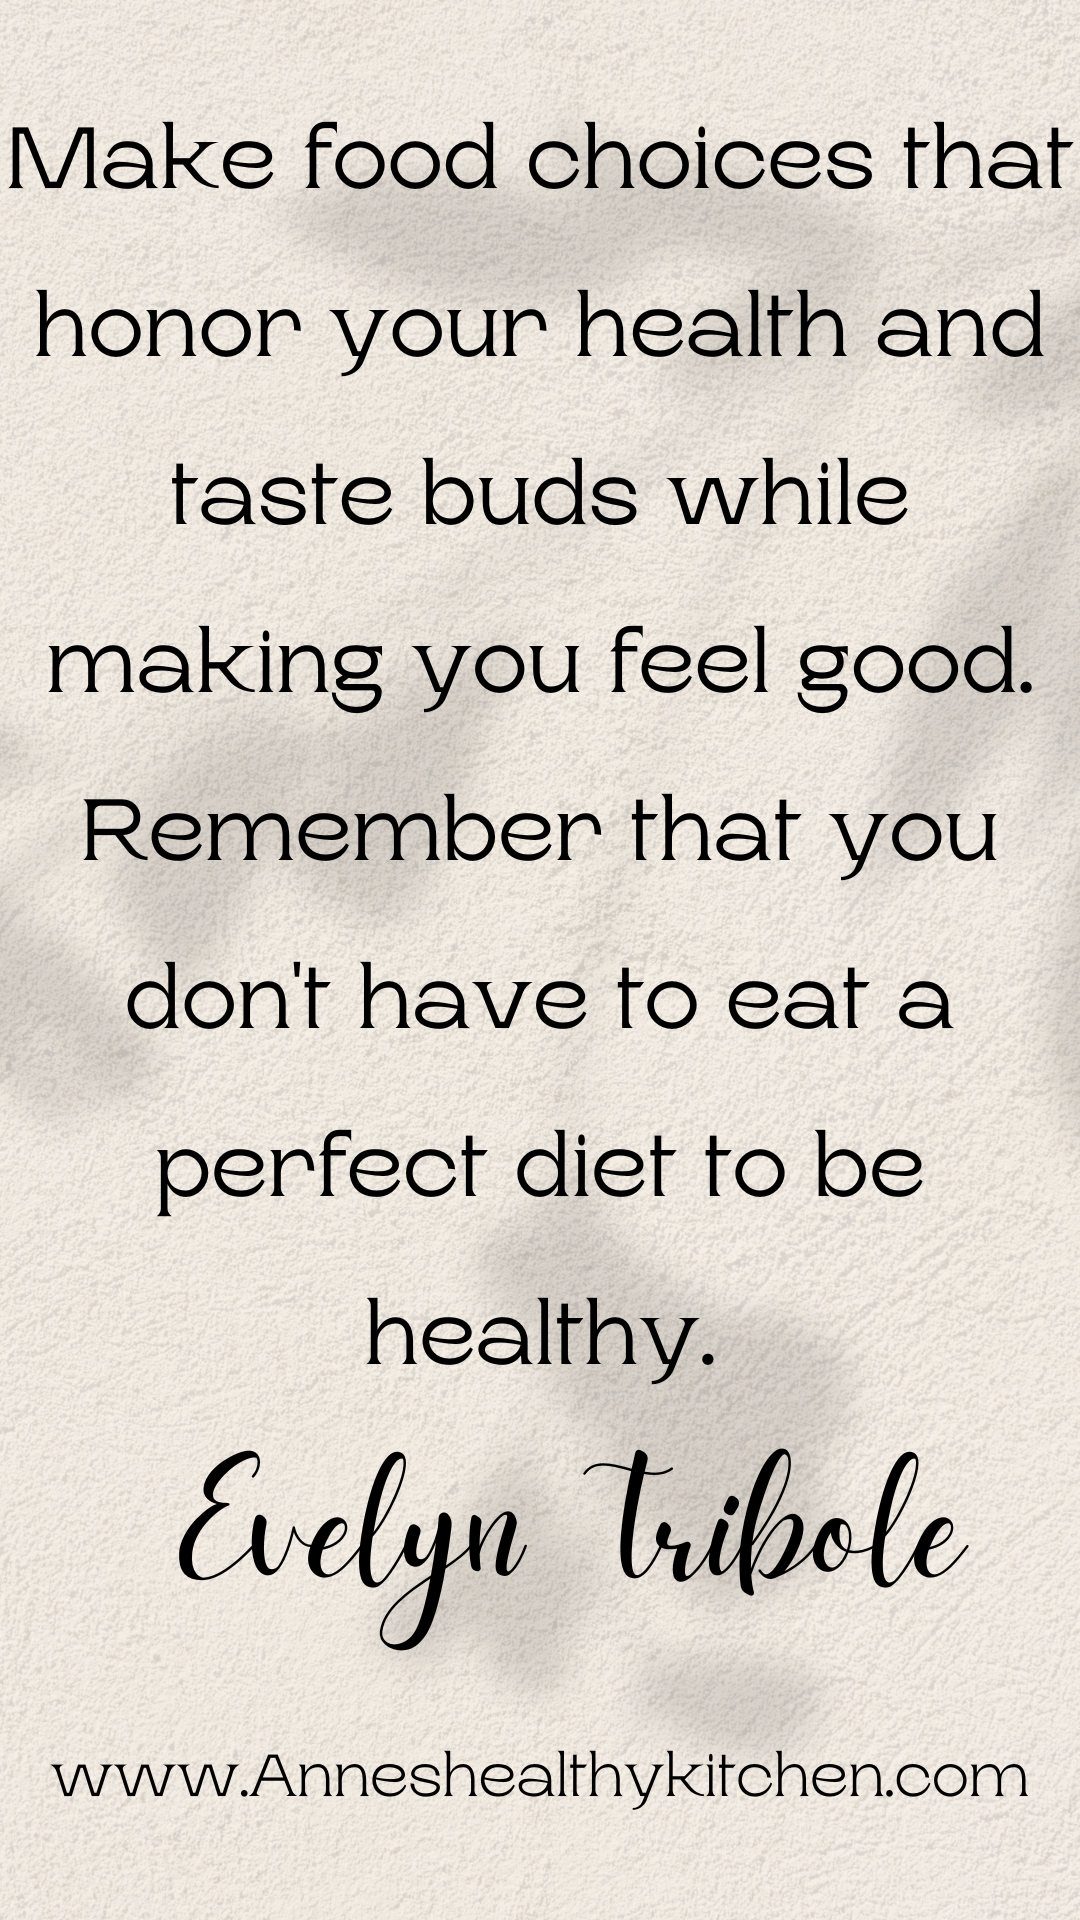 Make food choices that honor your health and taste buds while making you feel good. 